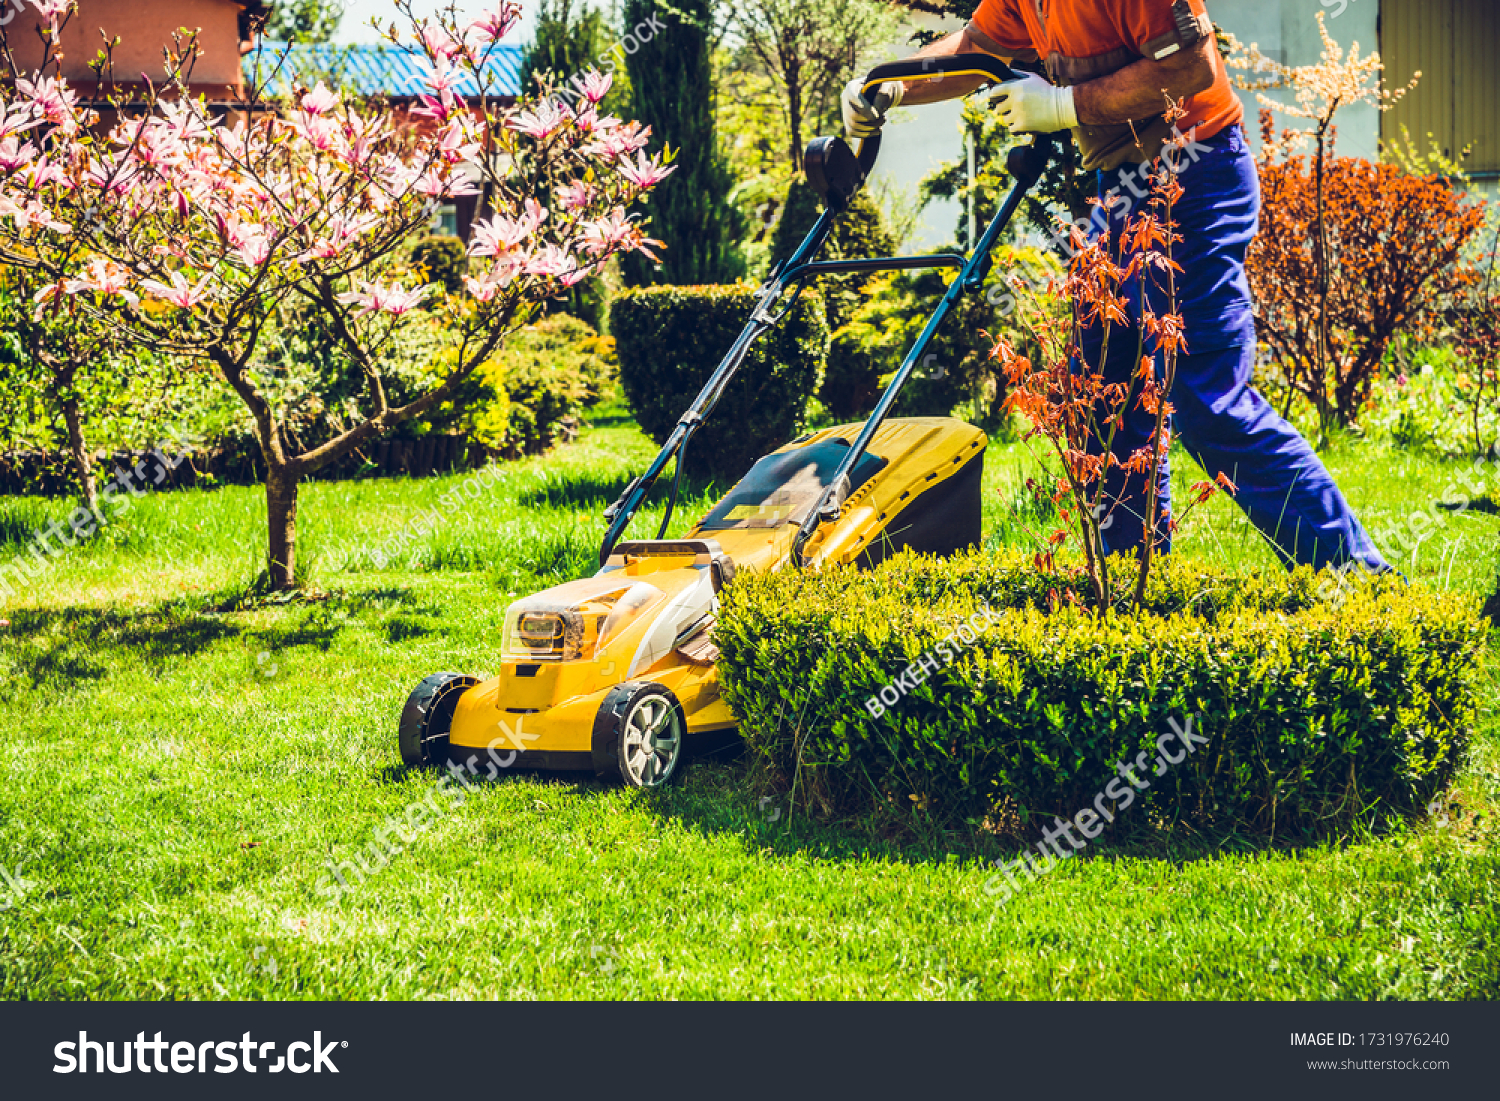 Mowing the grass. A man mows the grass with an electric mower. The concept of working in the garden and caring for the beauty of the garden. The gardener mows the grass with a battery mower.  #1731976240